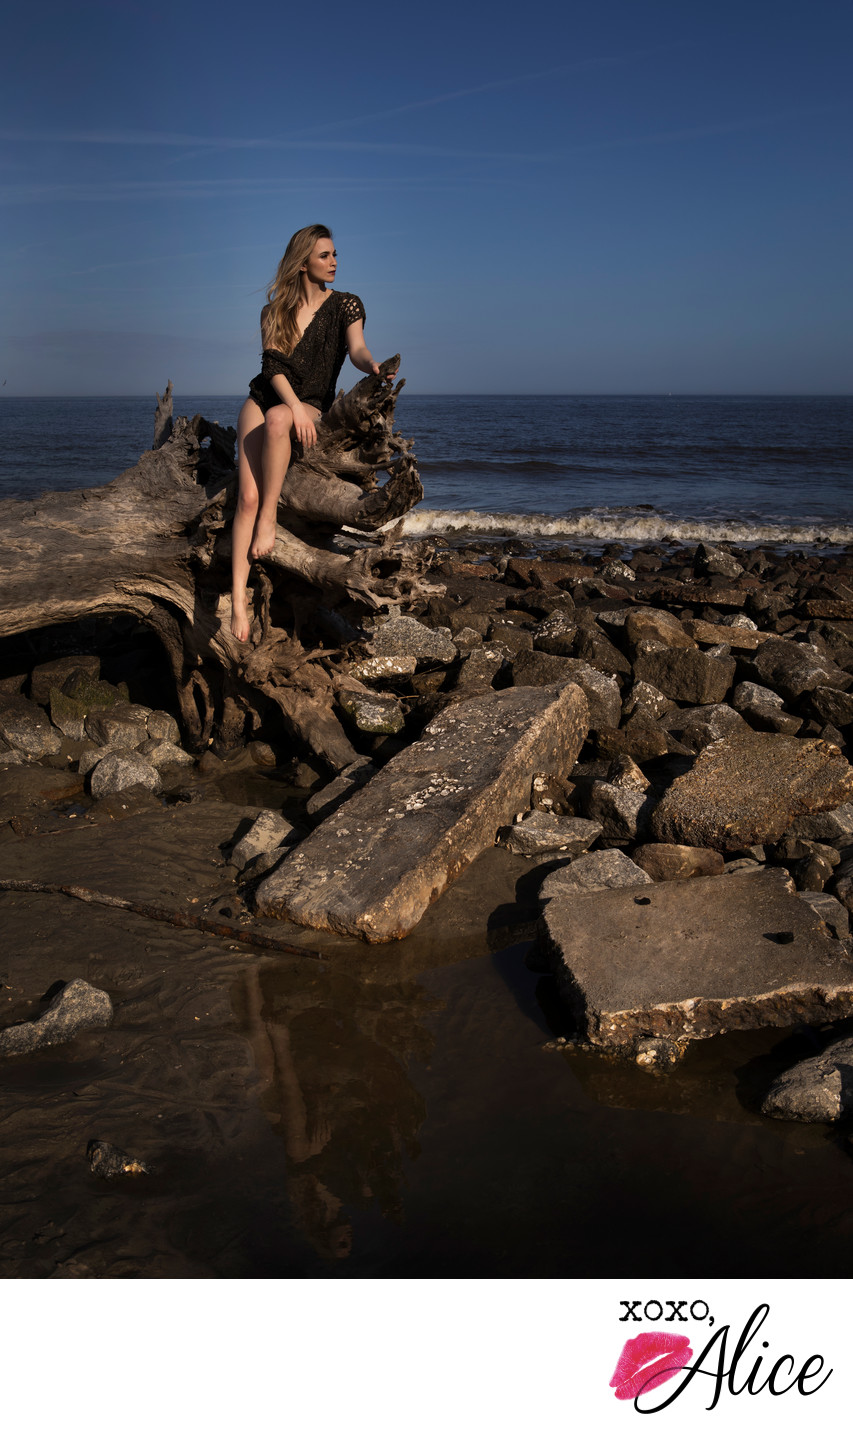 Epic beach photoshoot with driftwood and woven leather